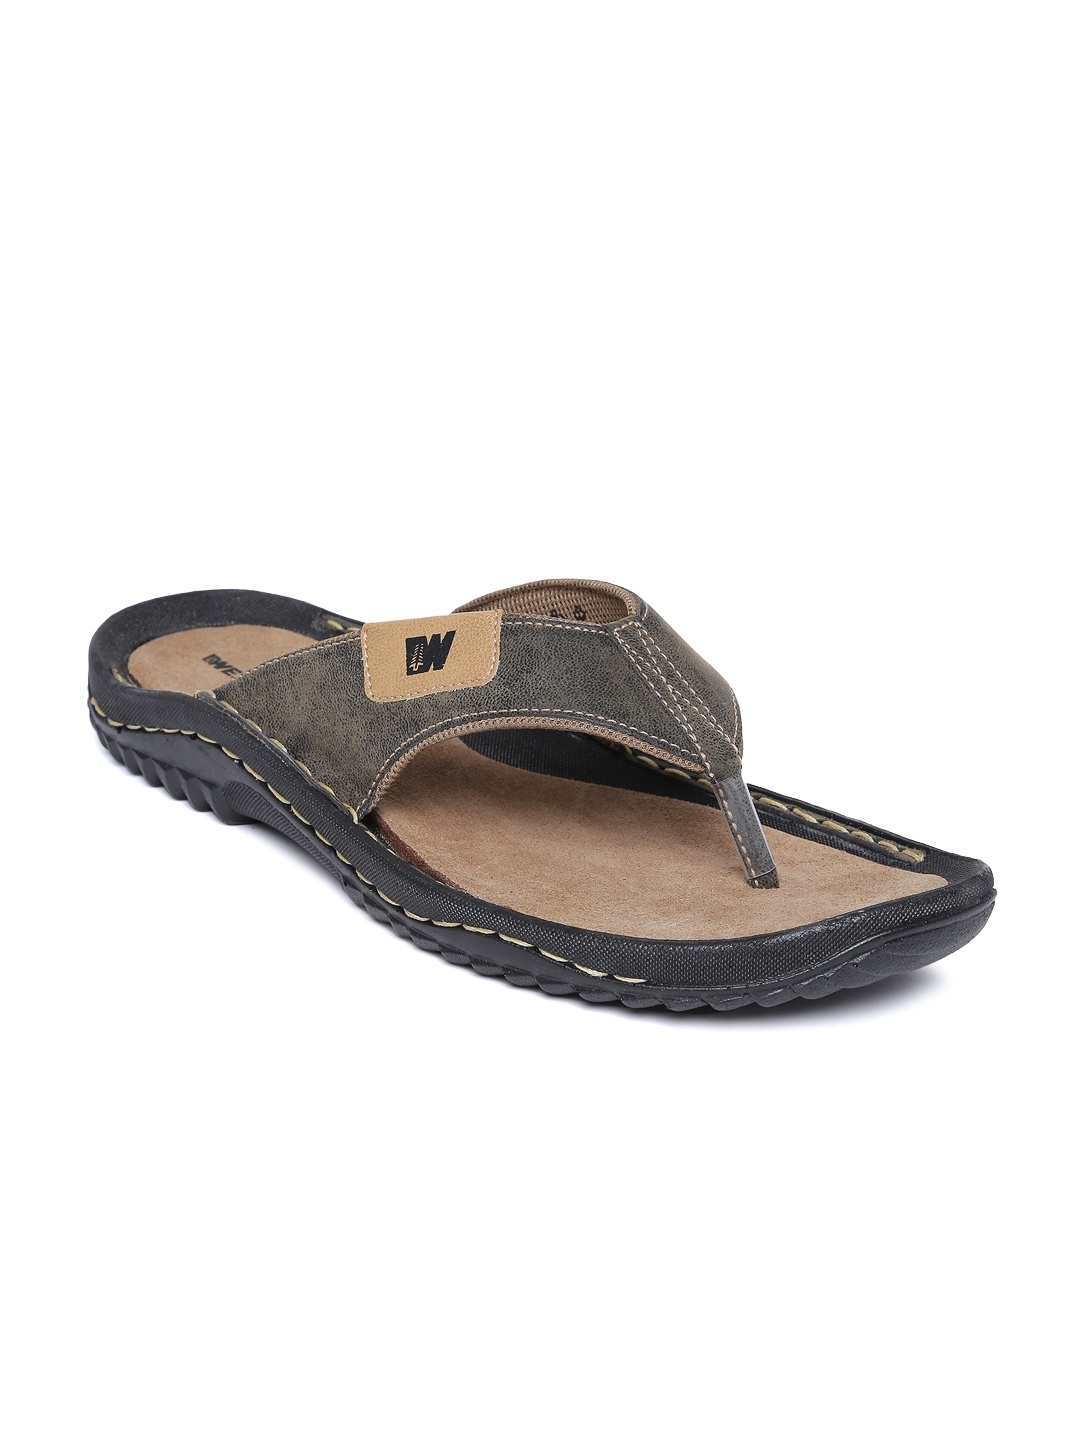 by bata women olive green sandals view product details more sandals ...